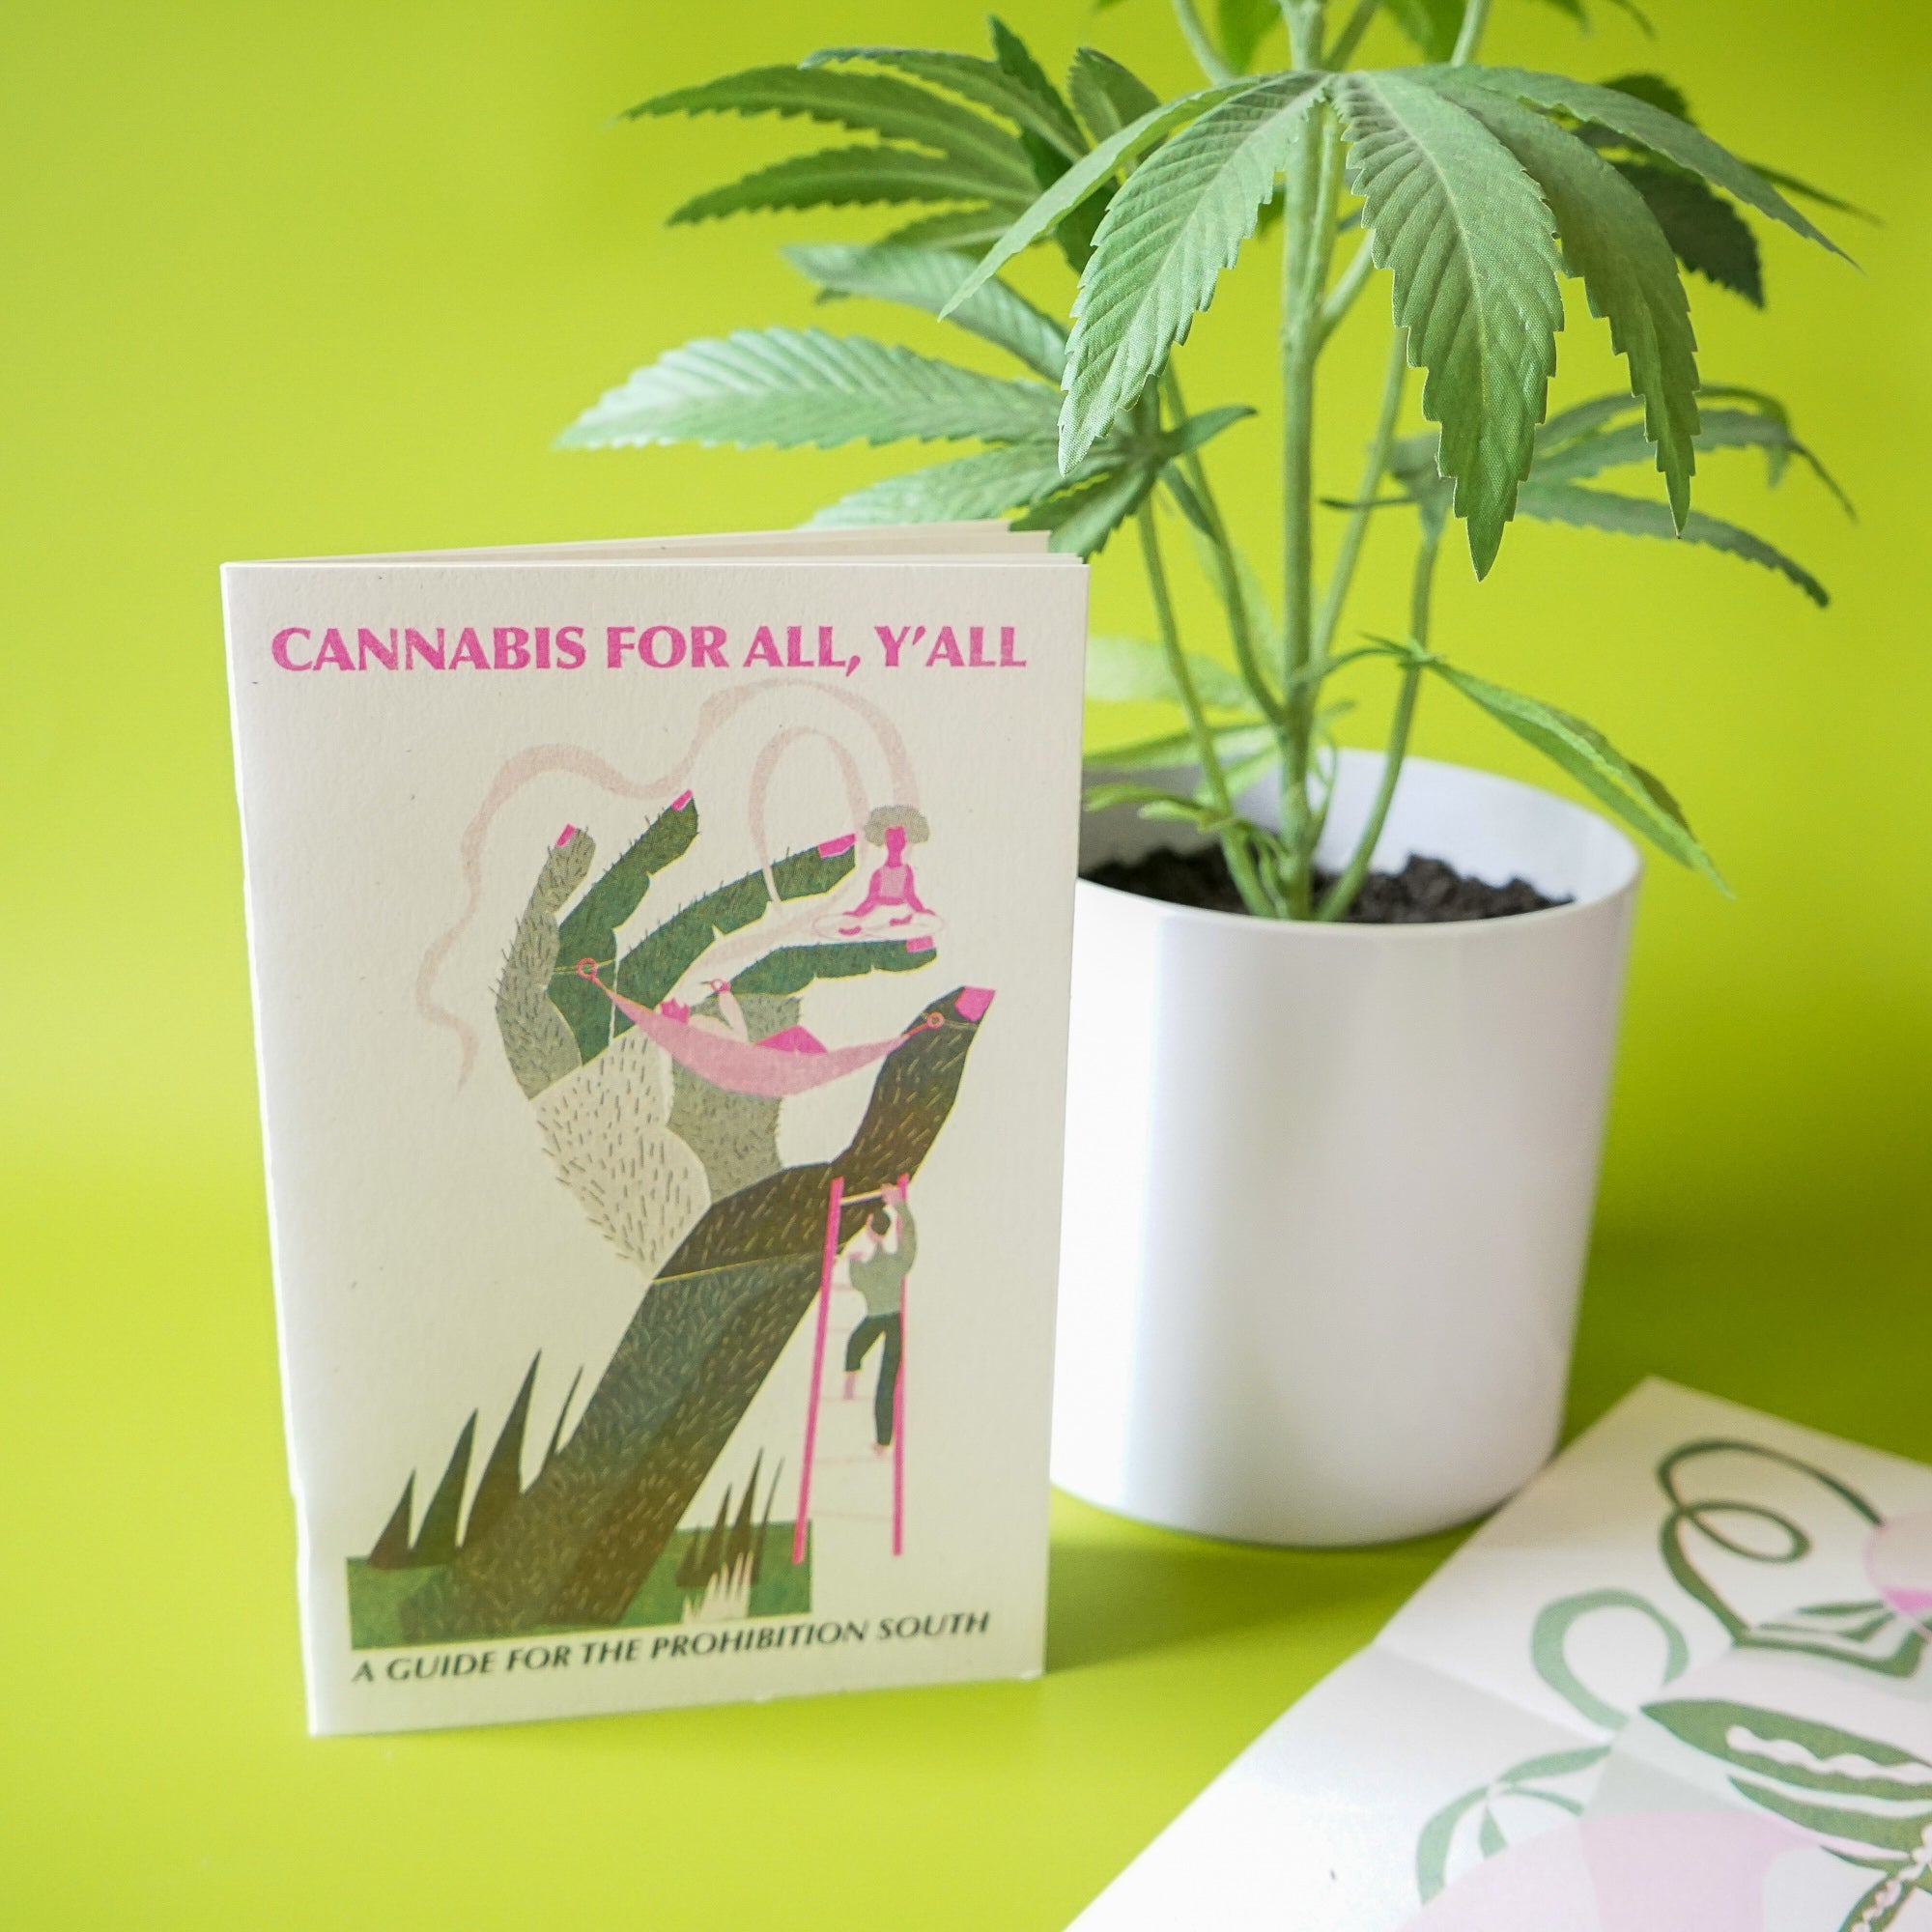 Cannabis for All, Y'all: A Guide for the Prohibition South